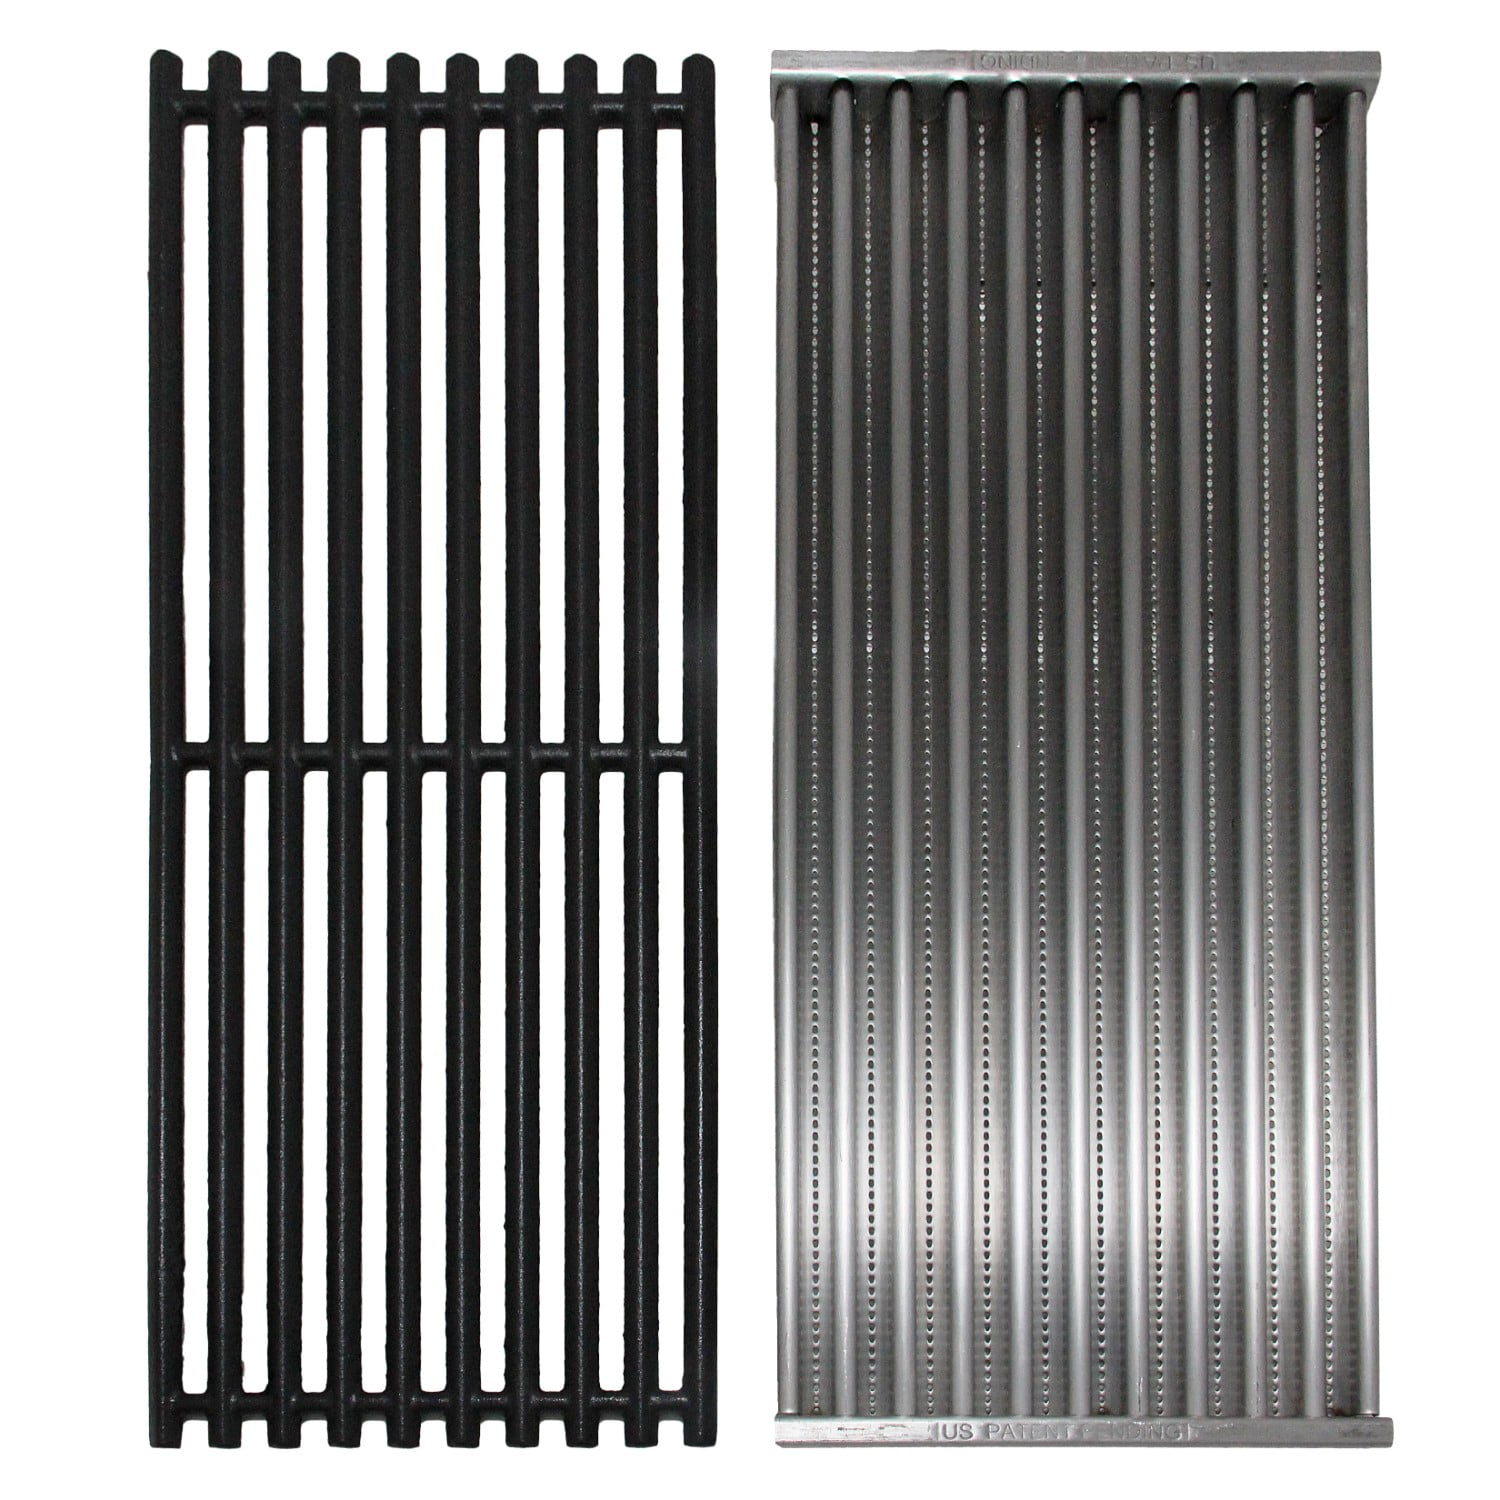 Char-Broil Universal Cast Iron Grate 